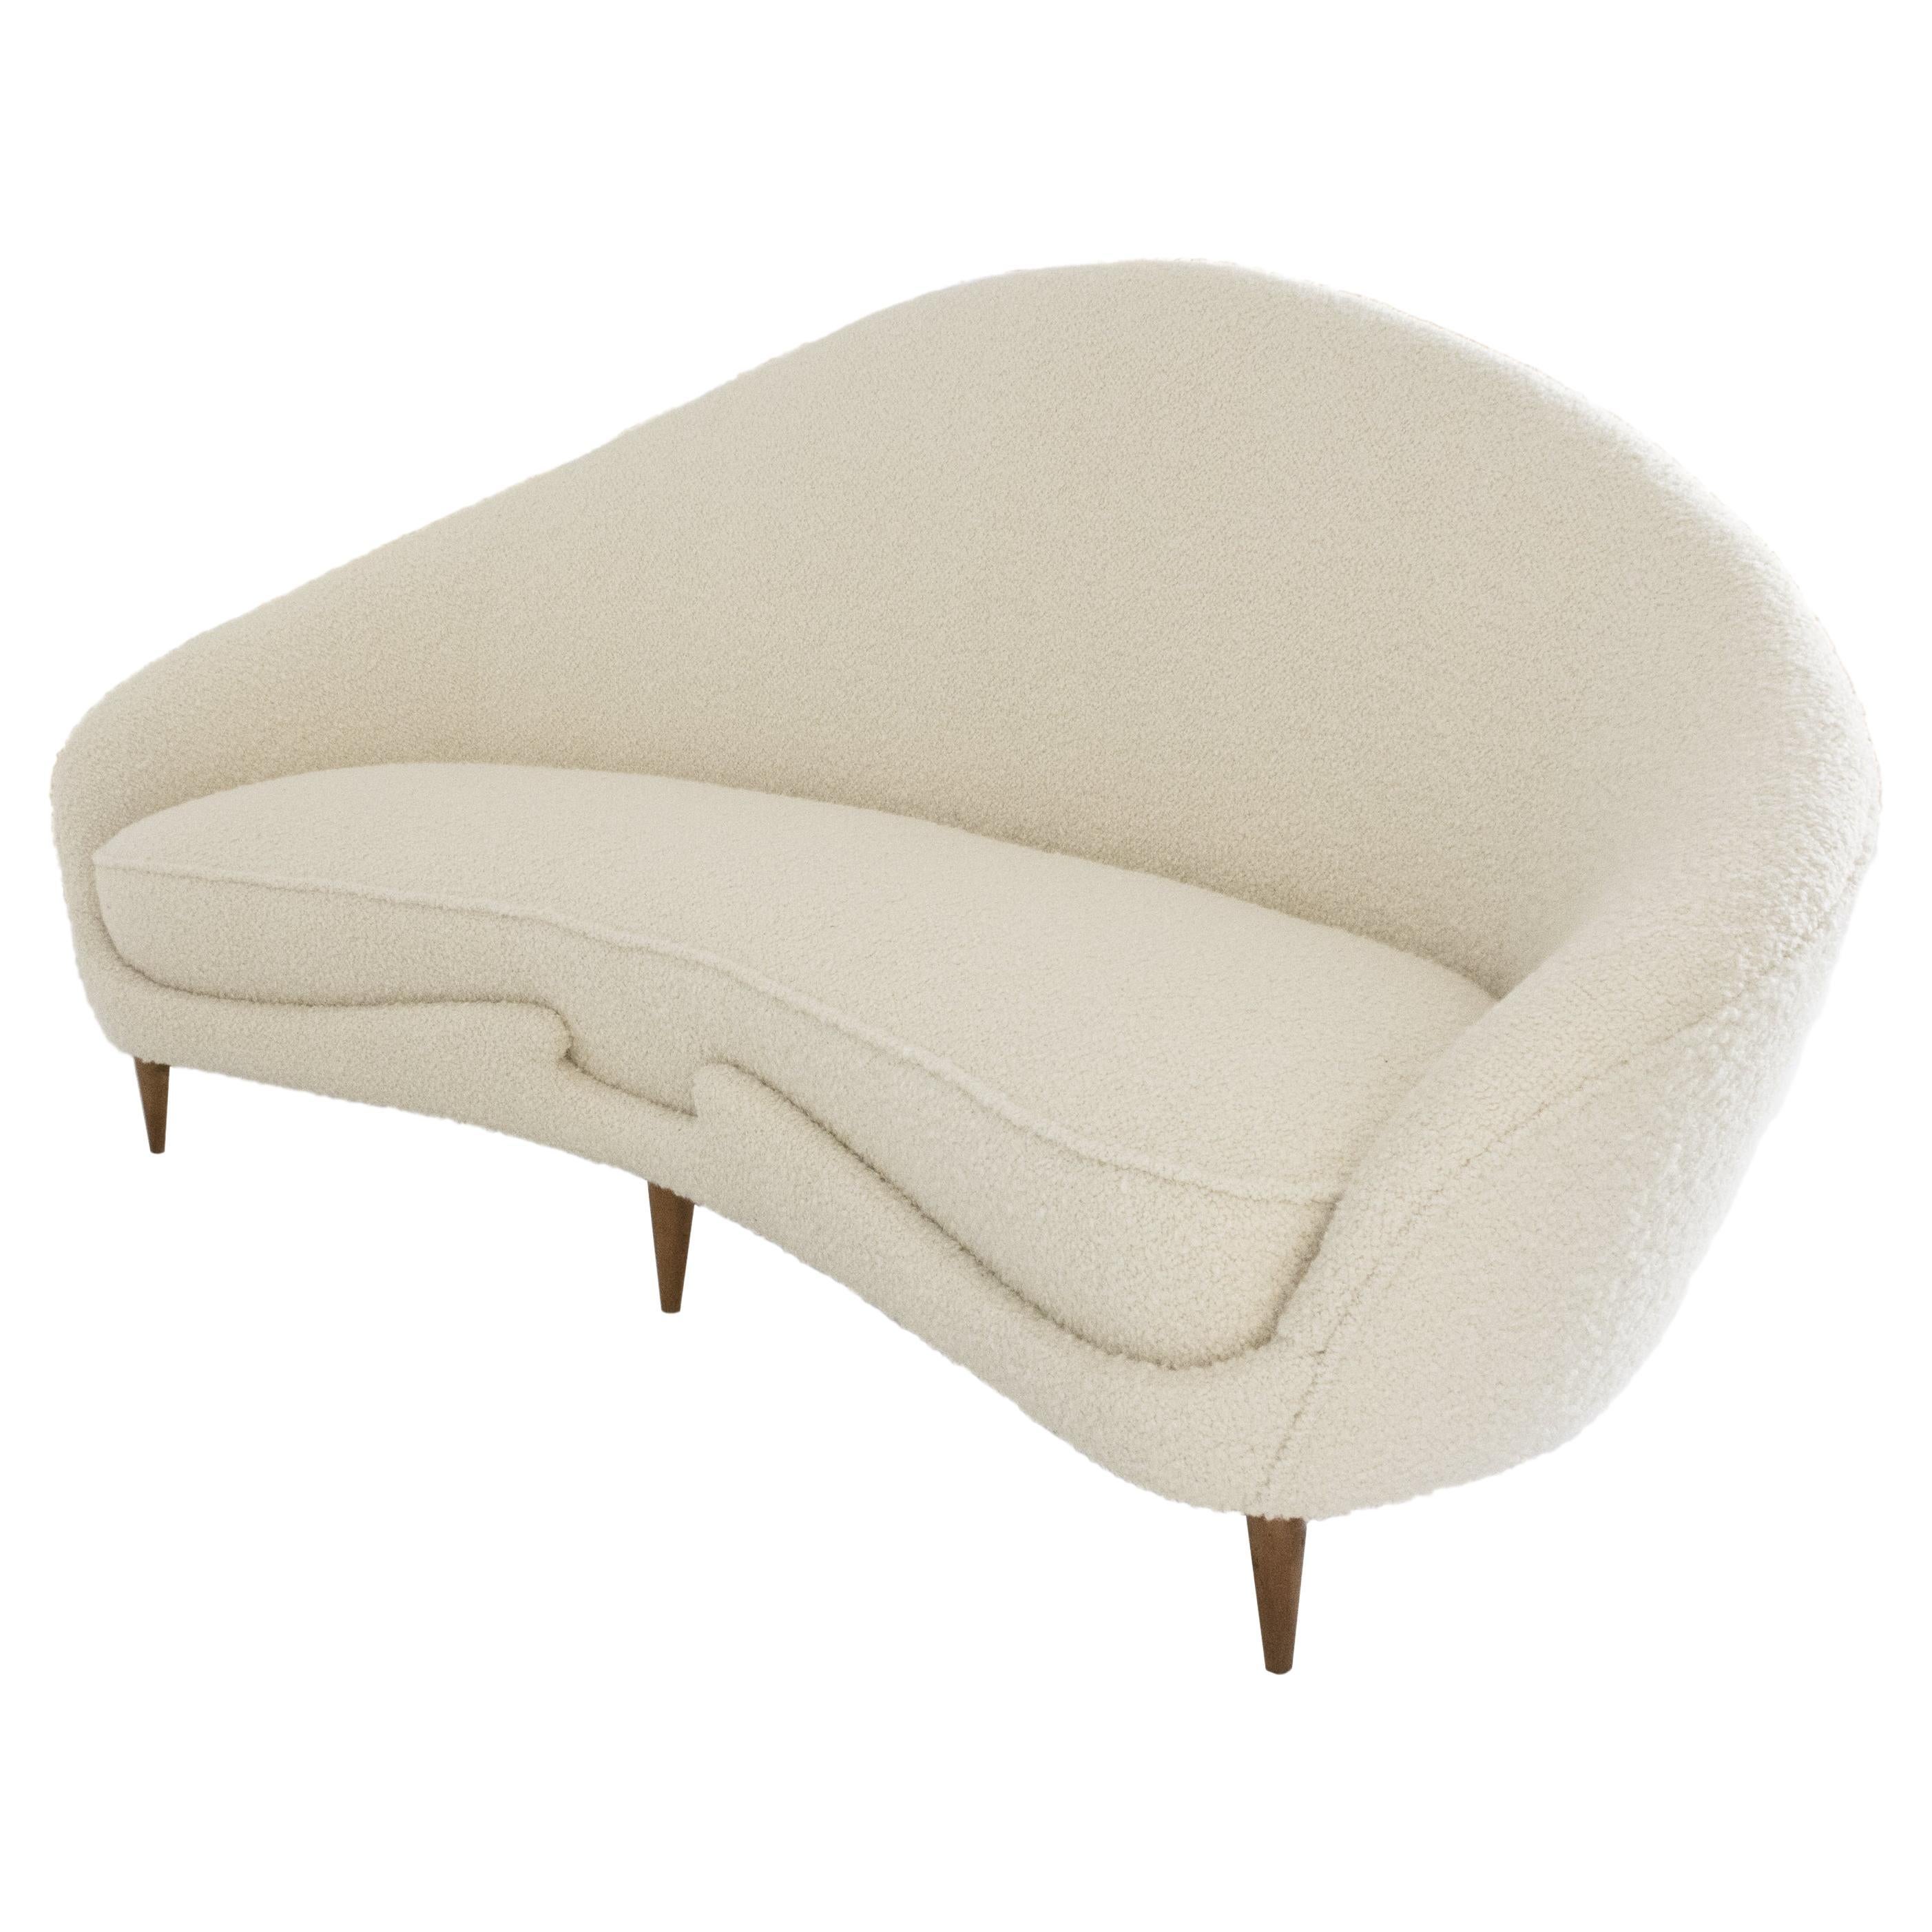 Mid-Century Organic Curved Sofa Reupholstered in Beige Buclé , Italia, 1950 For Sale